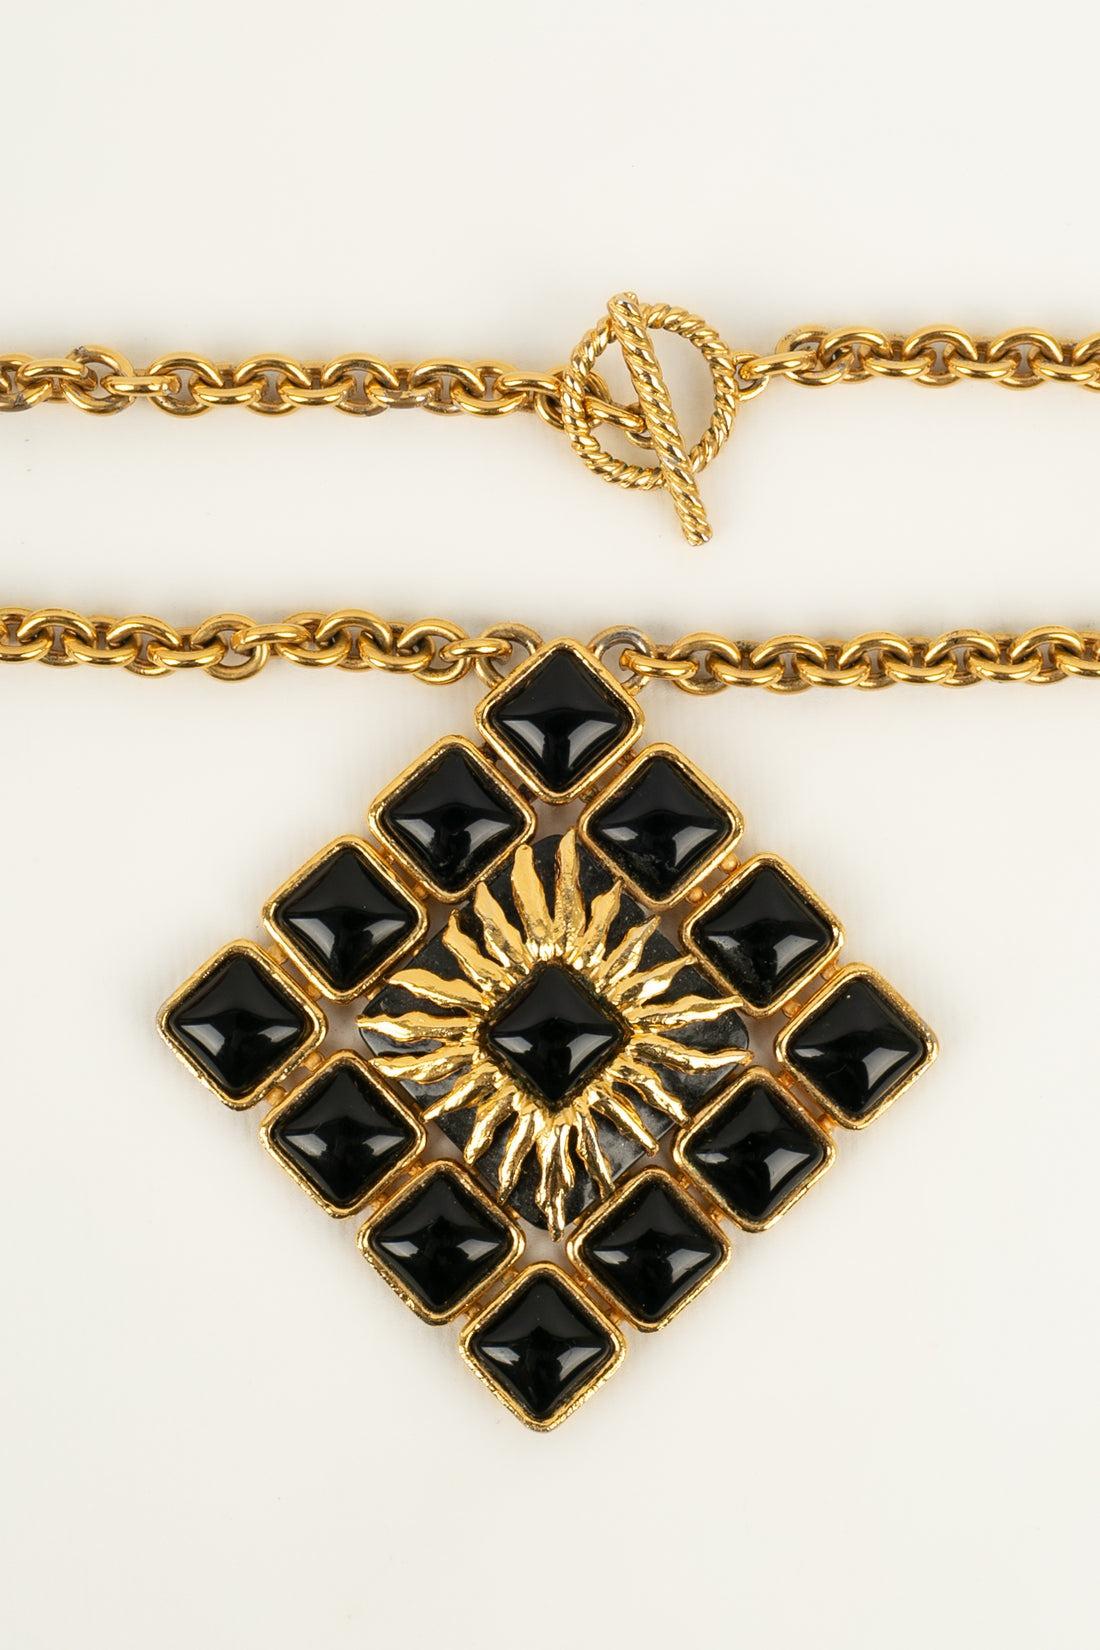 Jean Patou - Necklace in gold-plated metal and black glass paste.

Additional information:
Condition: Very good condition
Dimensions: Length: 80 cm

Seller Reference: BC188